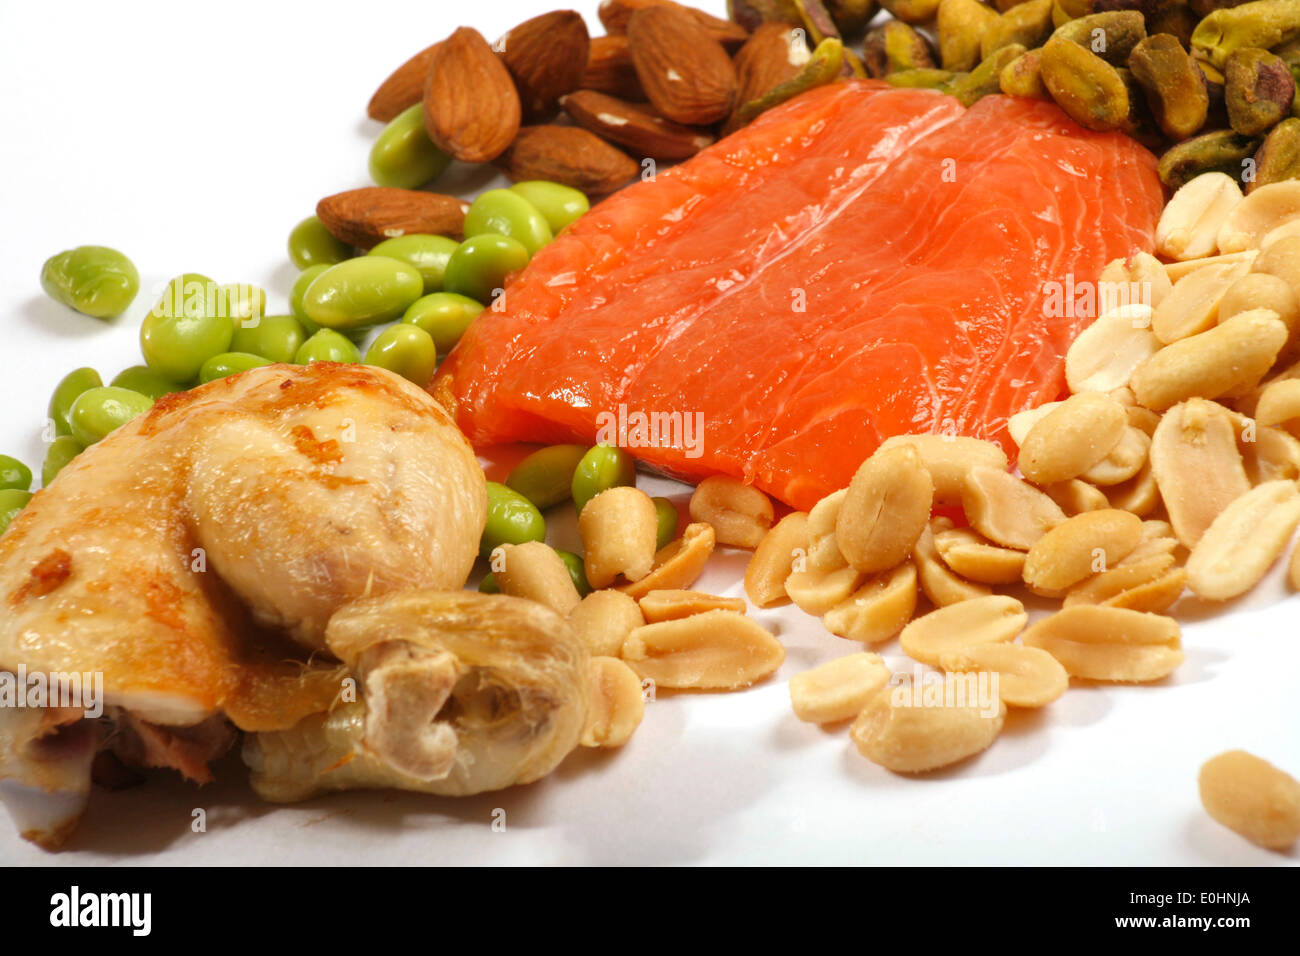 High Protein Foods Stock Photo